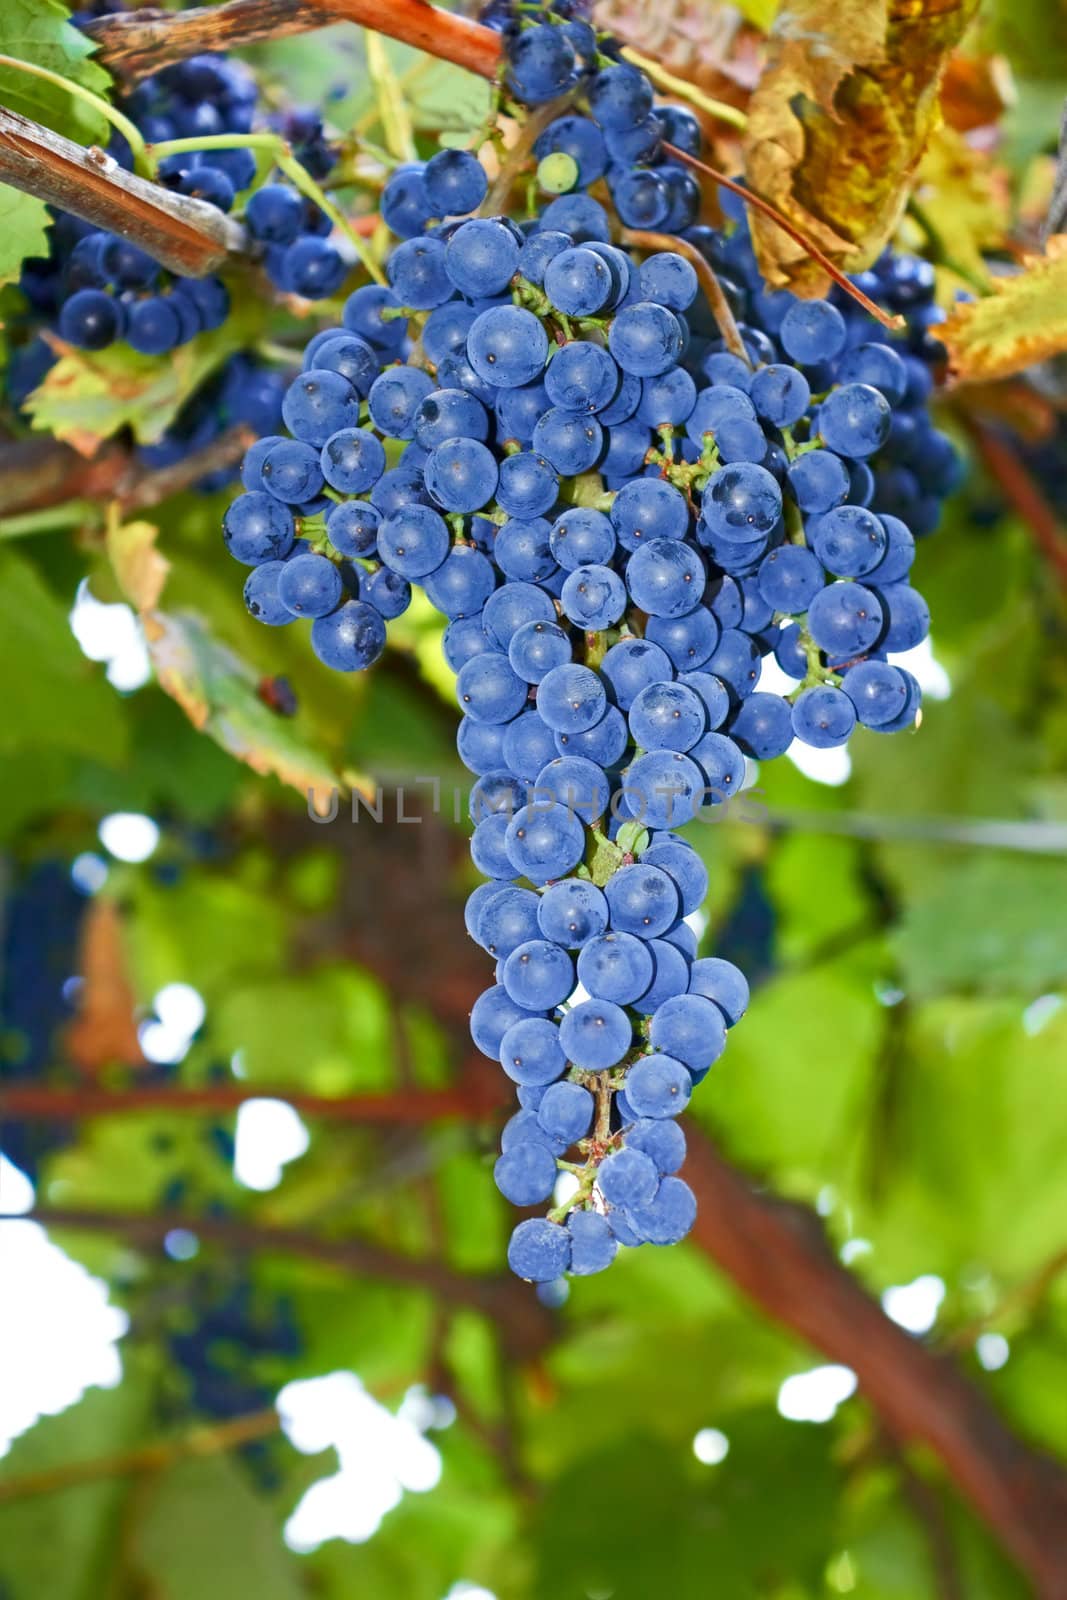 Bunches of blue ripe grapes hanging on the bush in autumn close-up